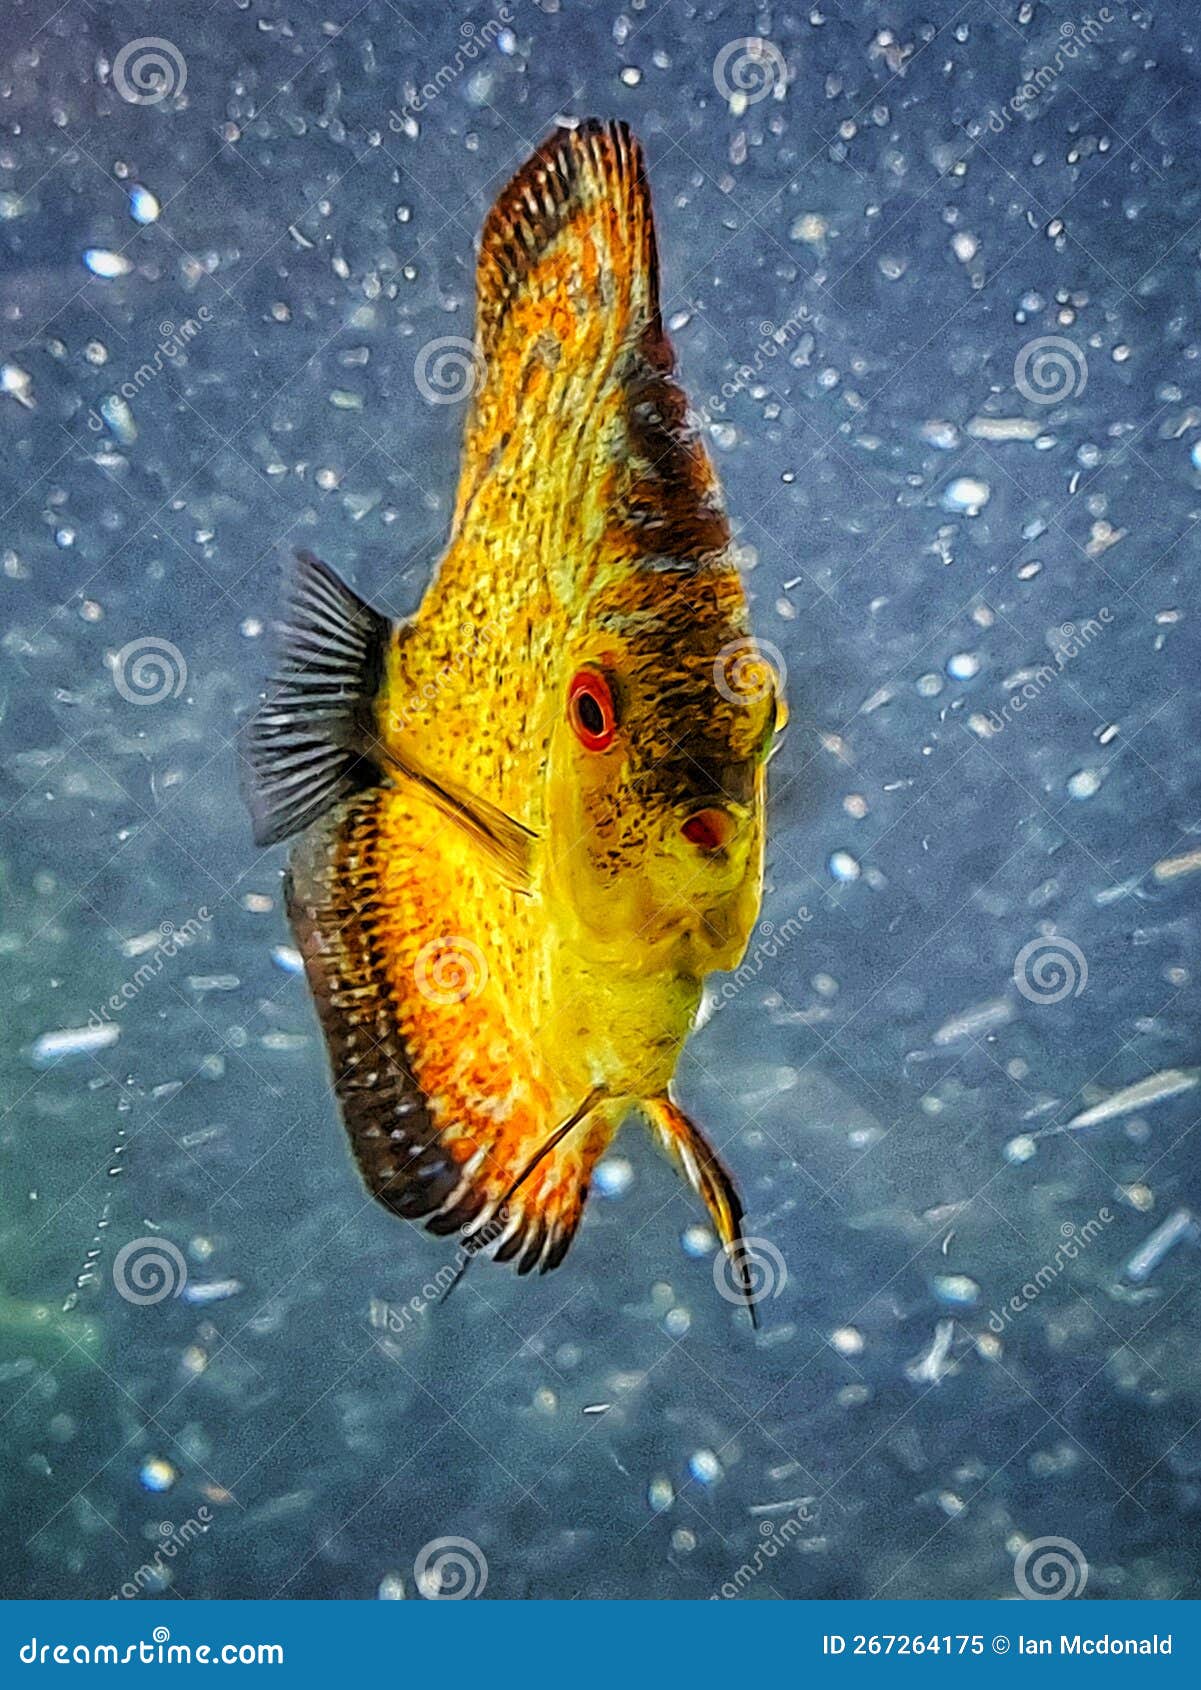 Red Marlboro Discus a Fresh Water Tropical Fish Native To the